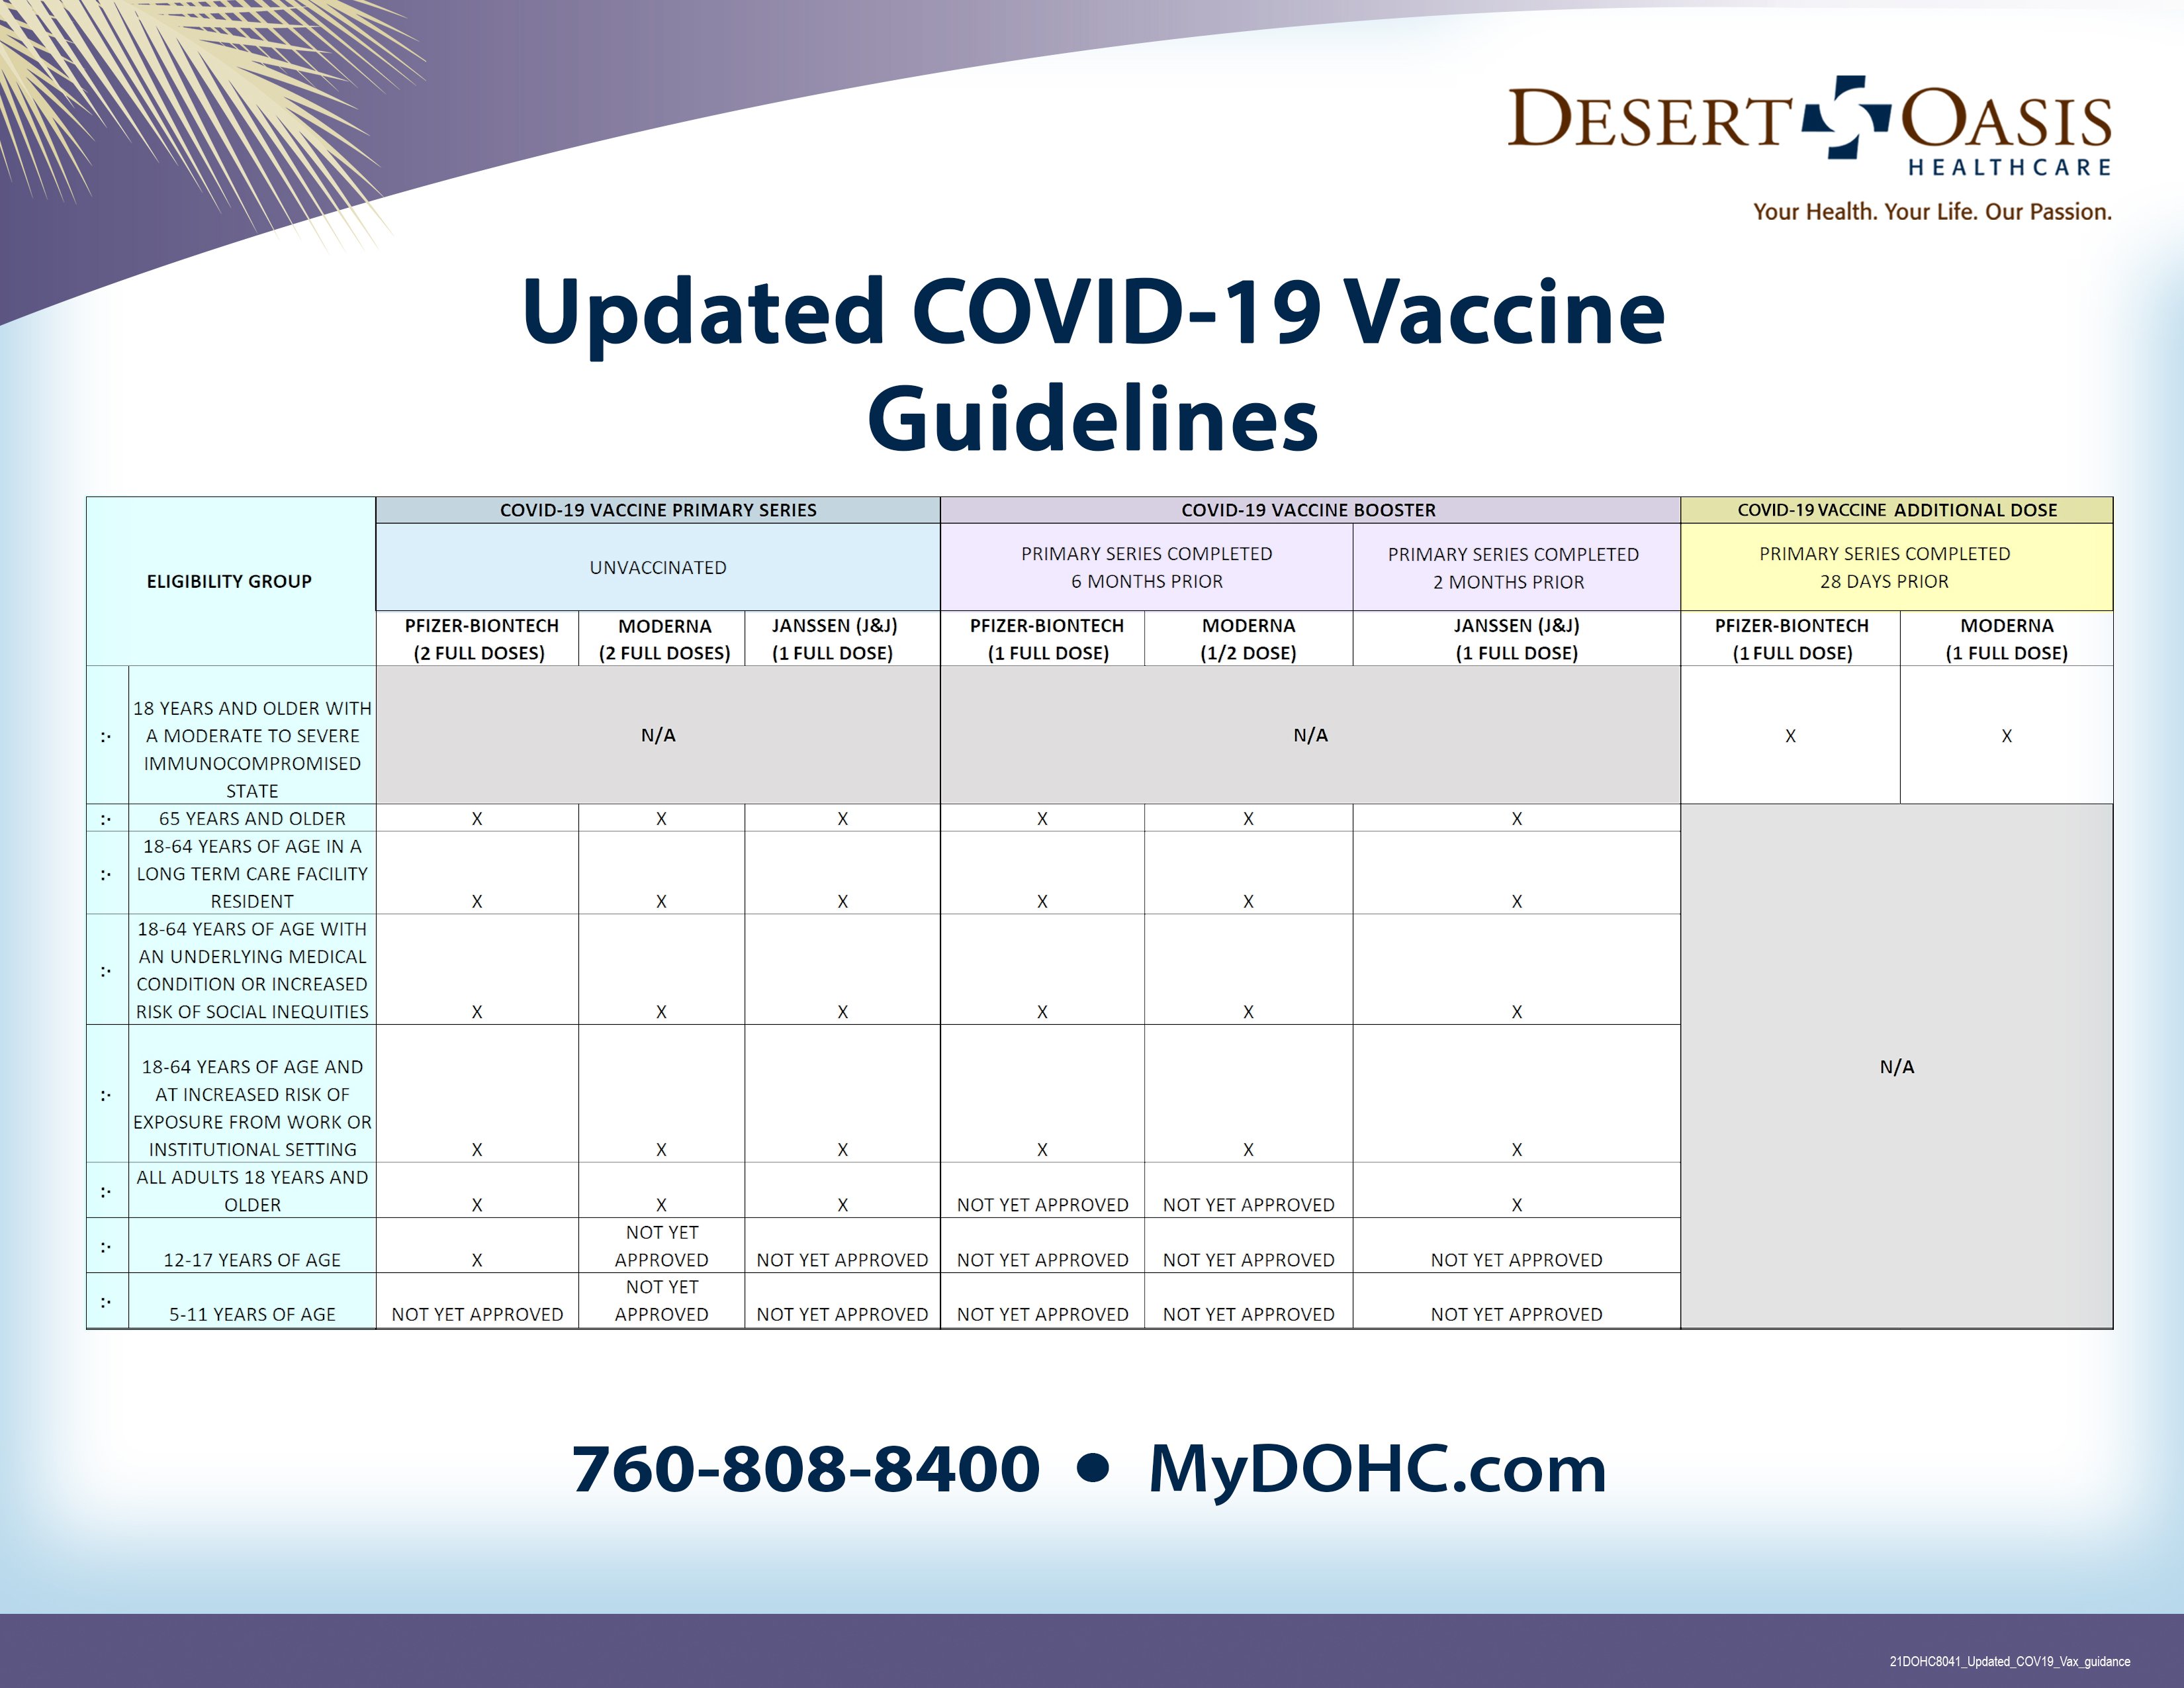 COVID-19 Vaccine Guidelines | Updated October 25, 2021